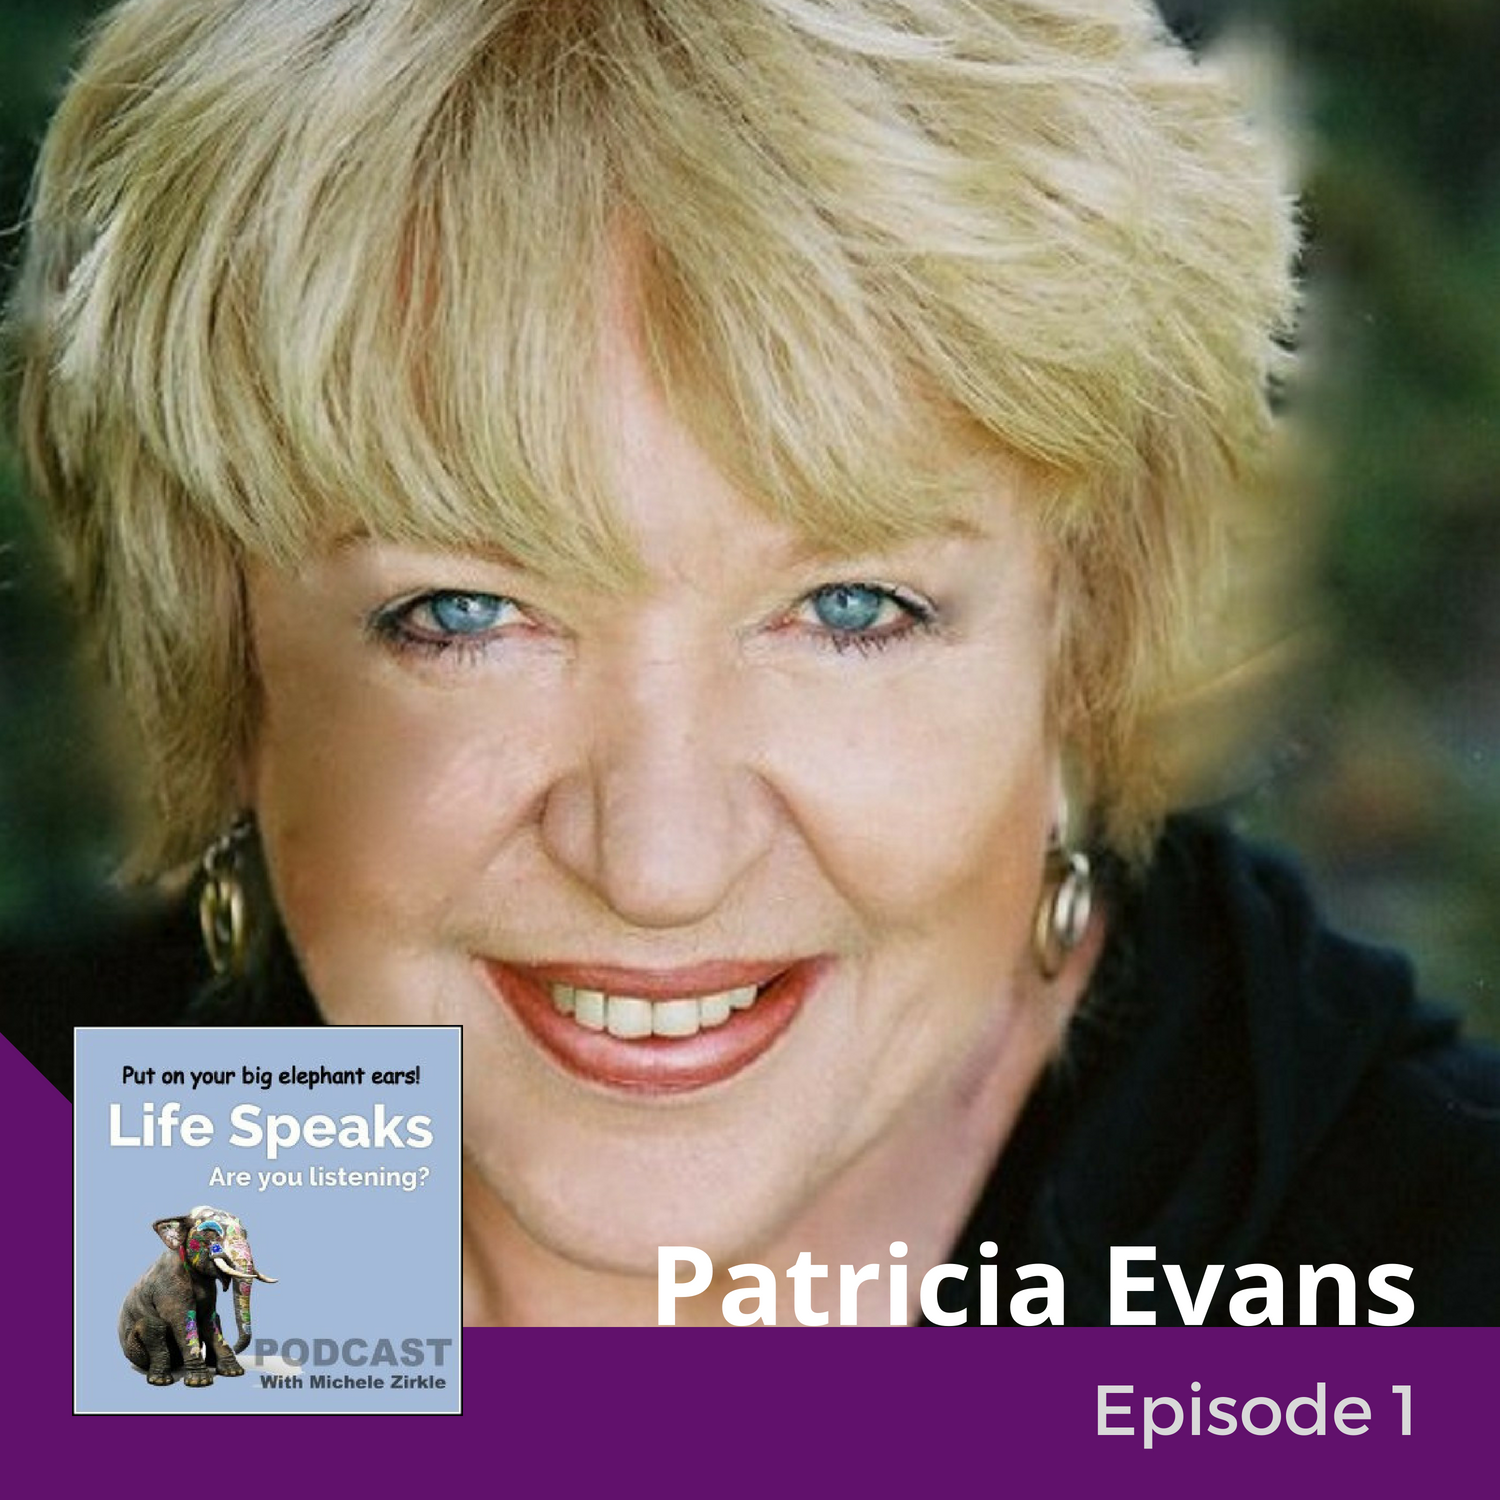 the verbally abusive relationship by patricia evans